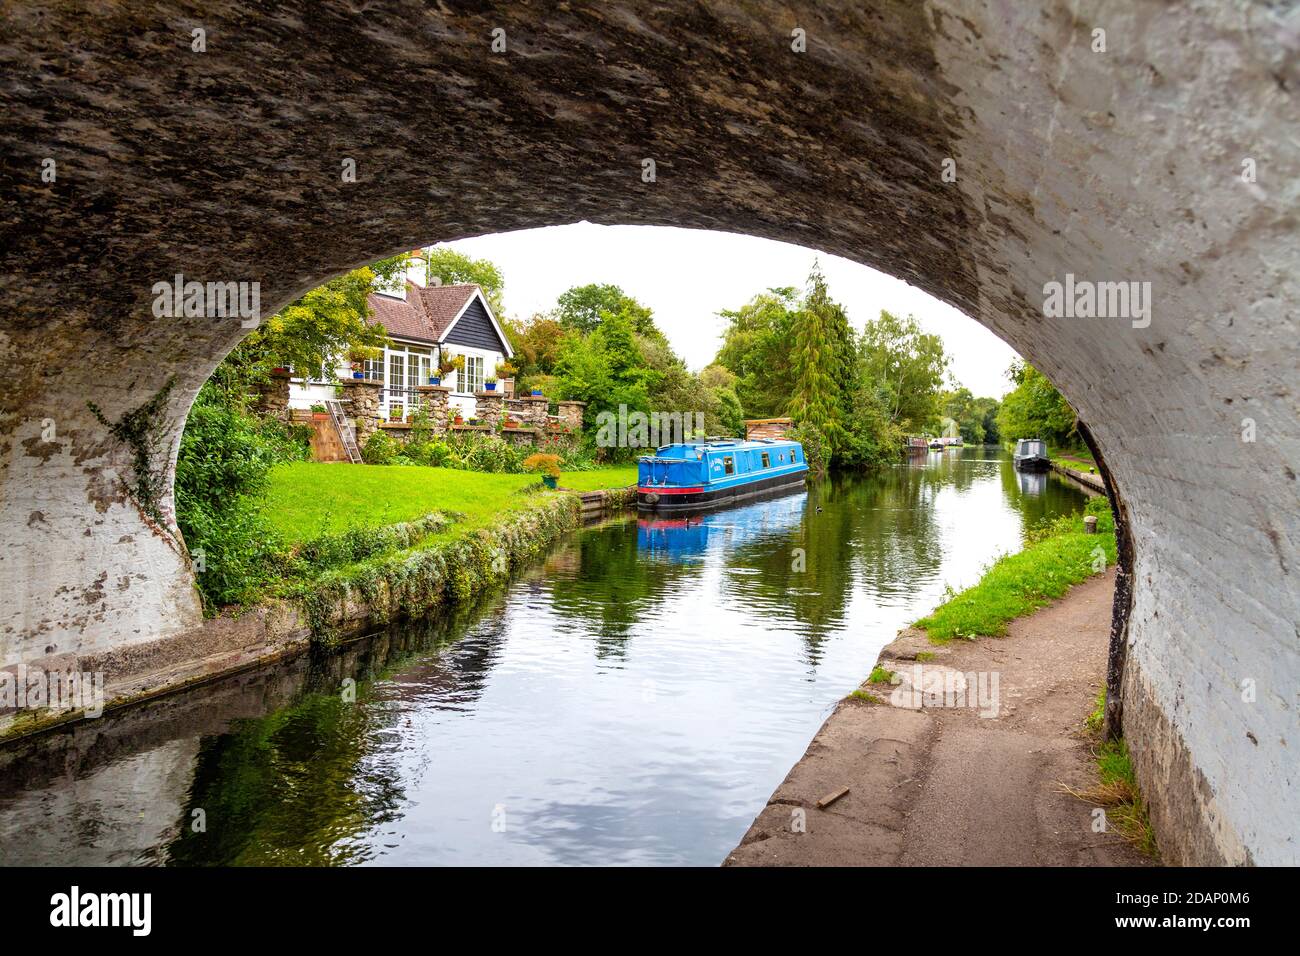 Charming countryside at Grand Union Canal with cottages and barges near Harefiled, Colne Valley, Uxbridge, UK Stock Photo